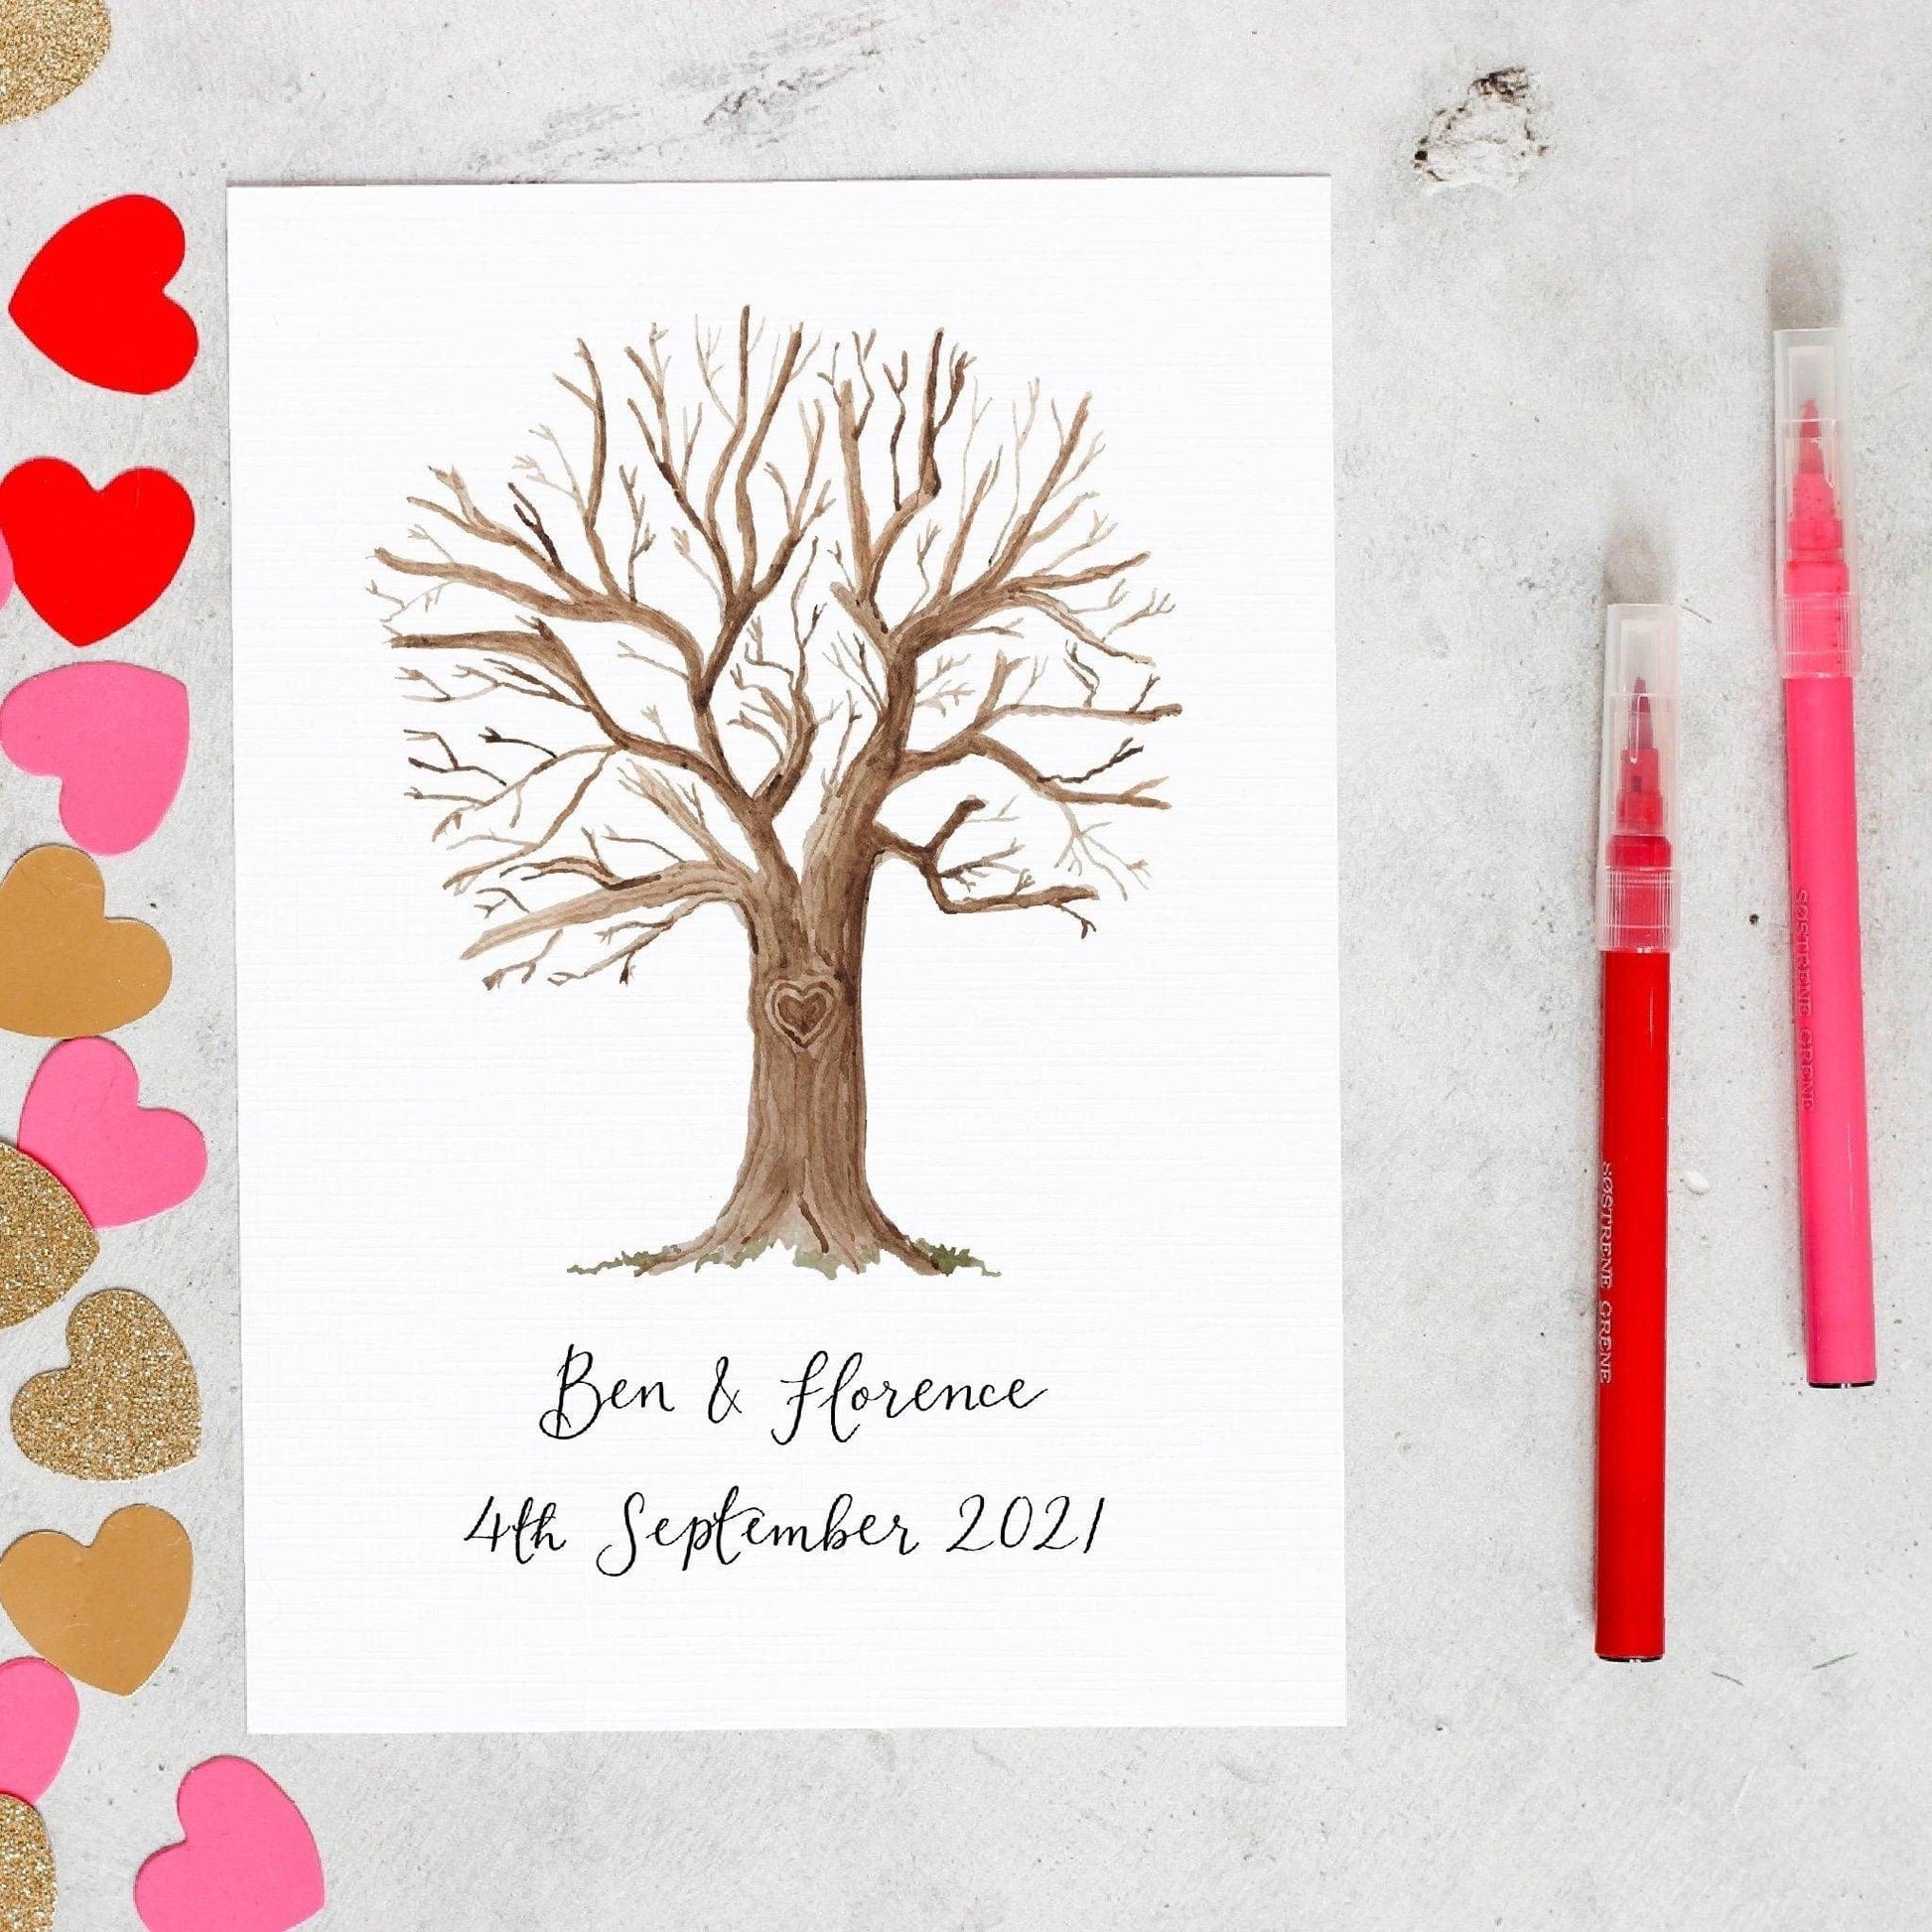 And Hope Designs Commission Personalised alternative wedding guest book